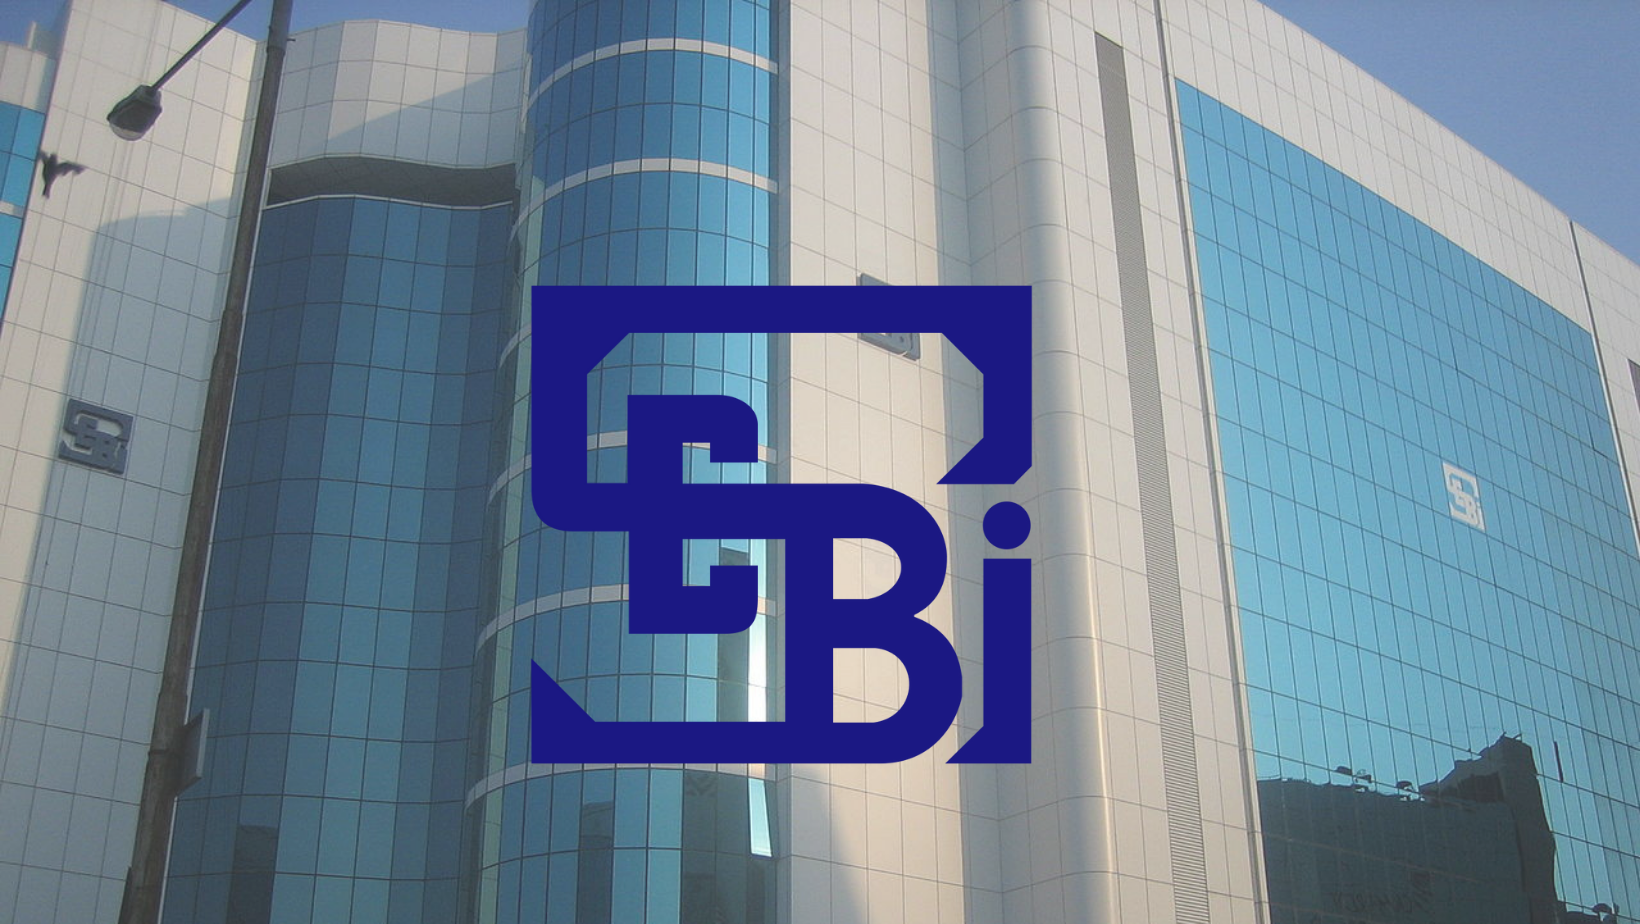 fraudulent trading: sebi confirms directions against former cnbc awaaz anchor, his family members » news live tv » business